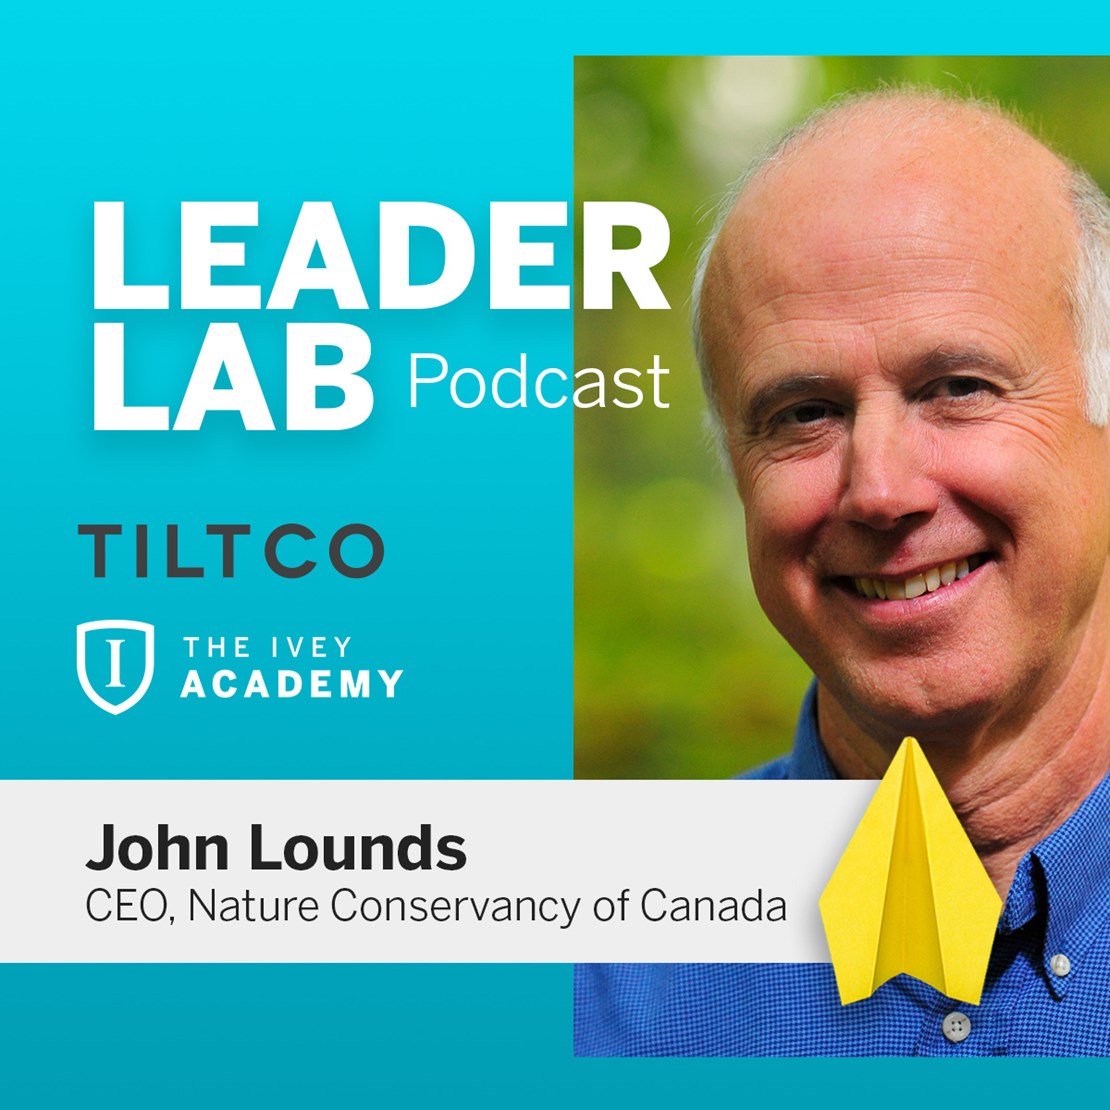 Leader Lab Episode with Nature Conservancy of Canada CEO John Lounds